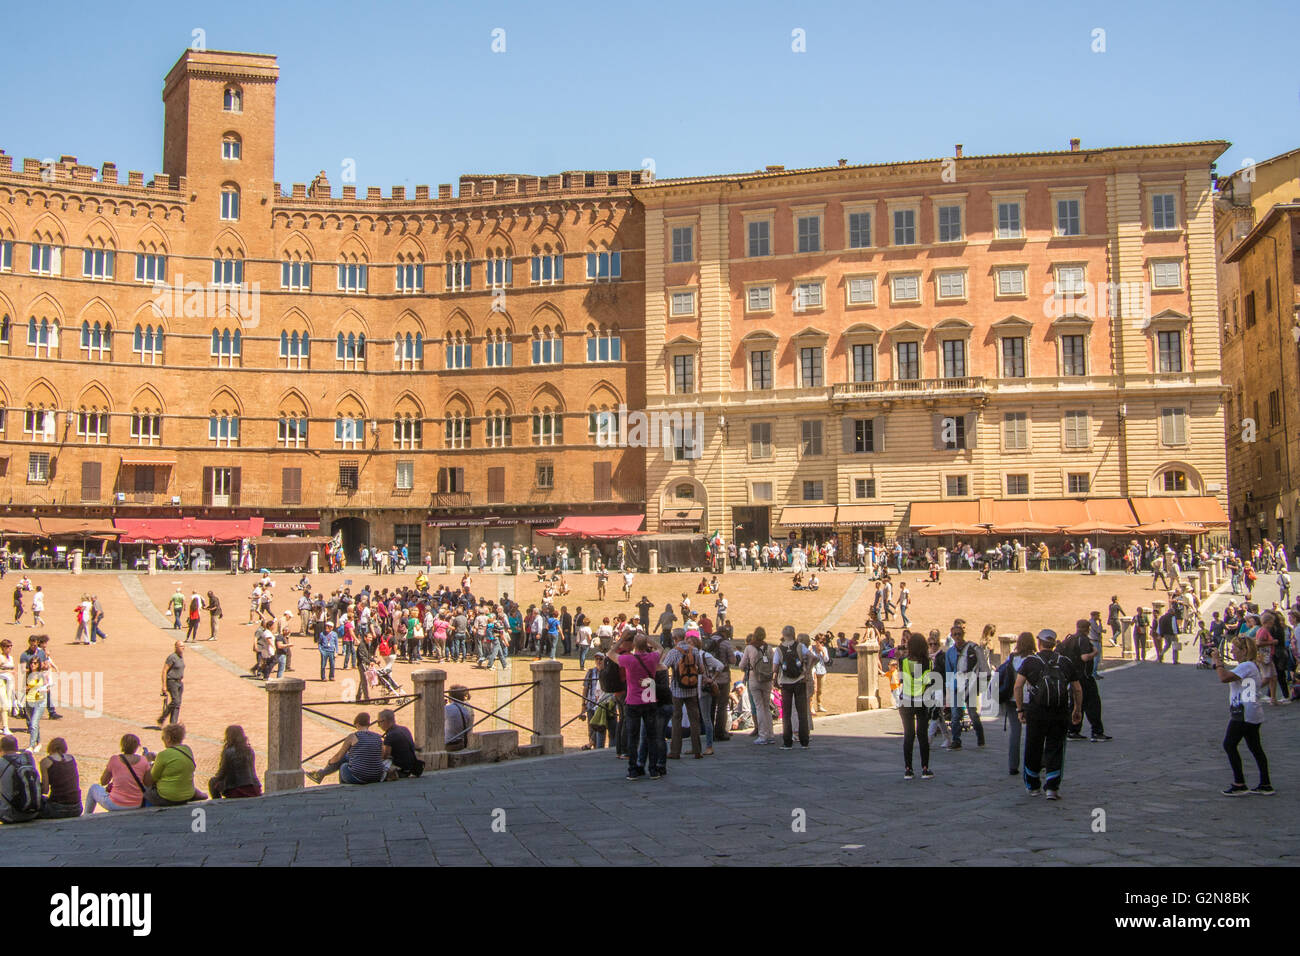 Architecture in 'Il Campo', a medieval Piazza in Siena, Tuscany, Italy Stock Photo